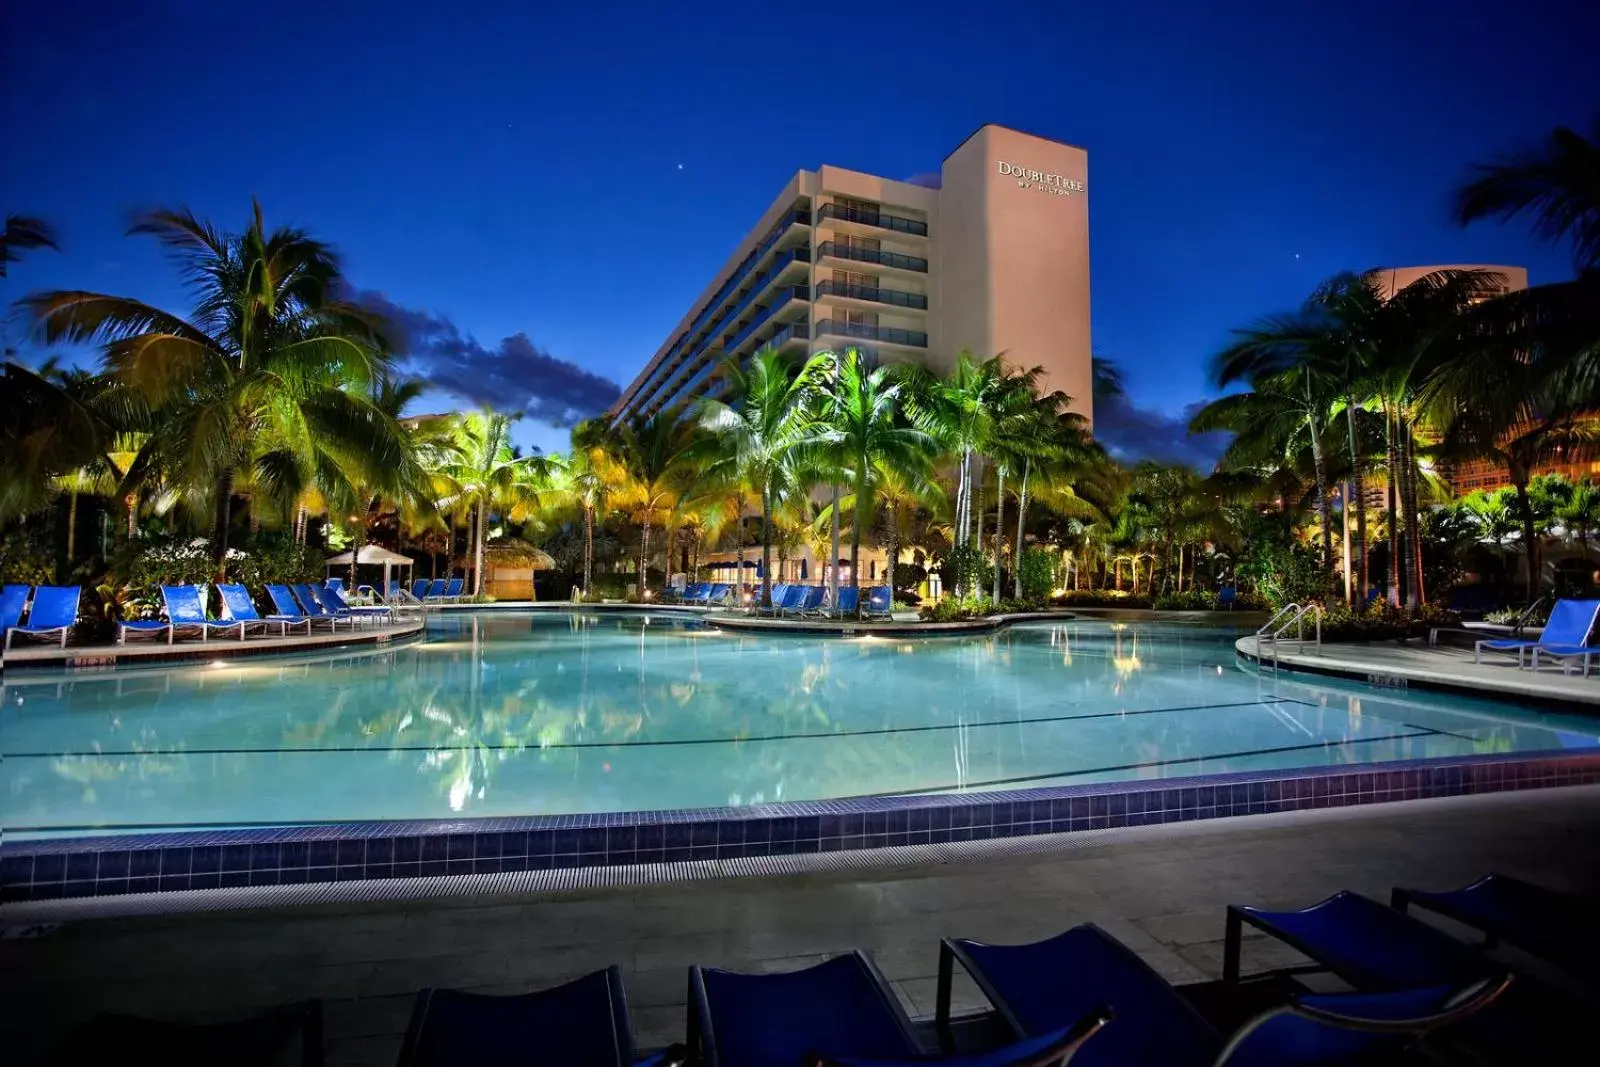 Property building, Swimming Pool in DoubleTree Resort Hollywood Beach